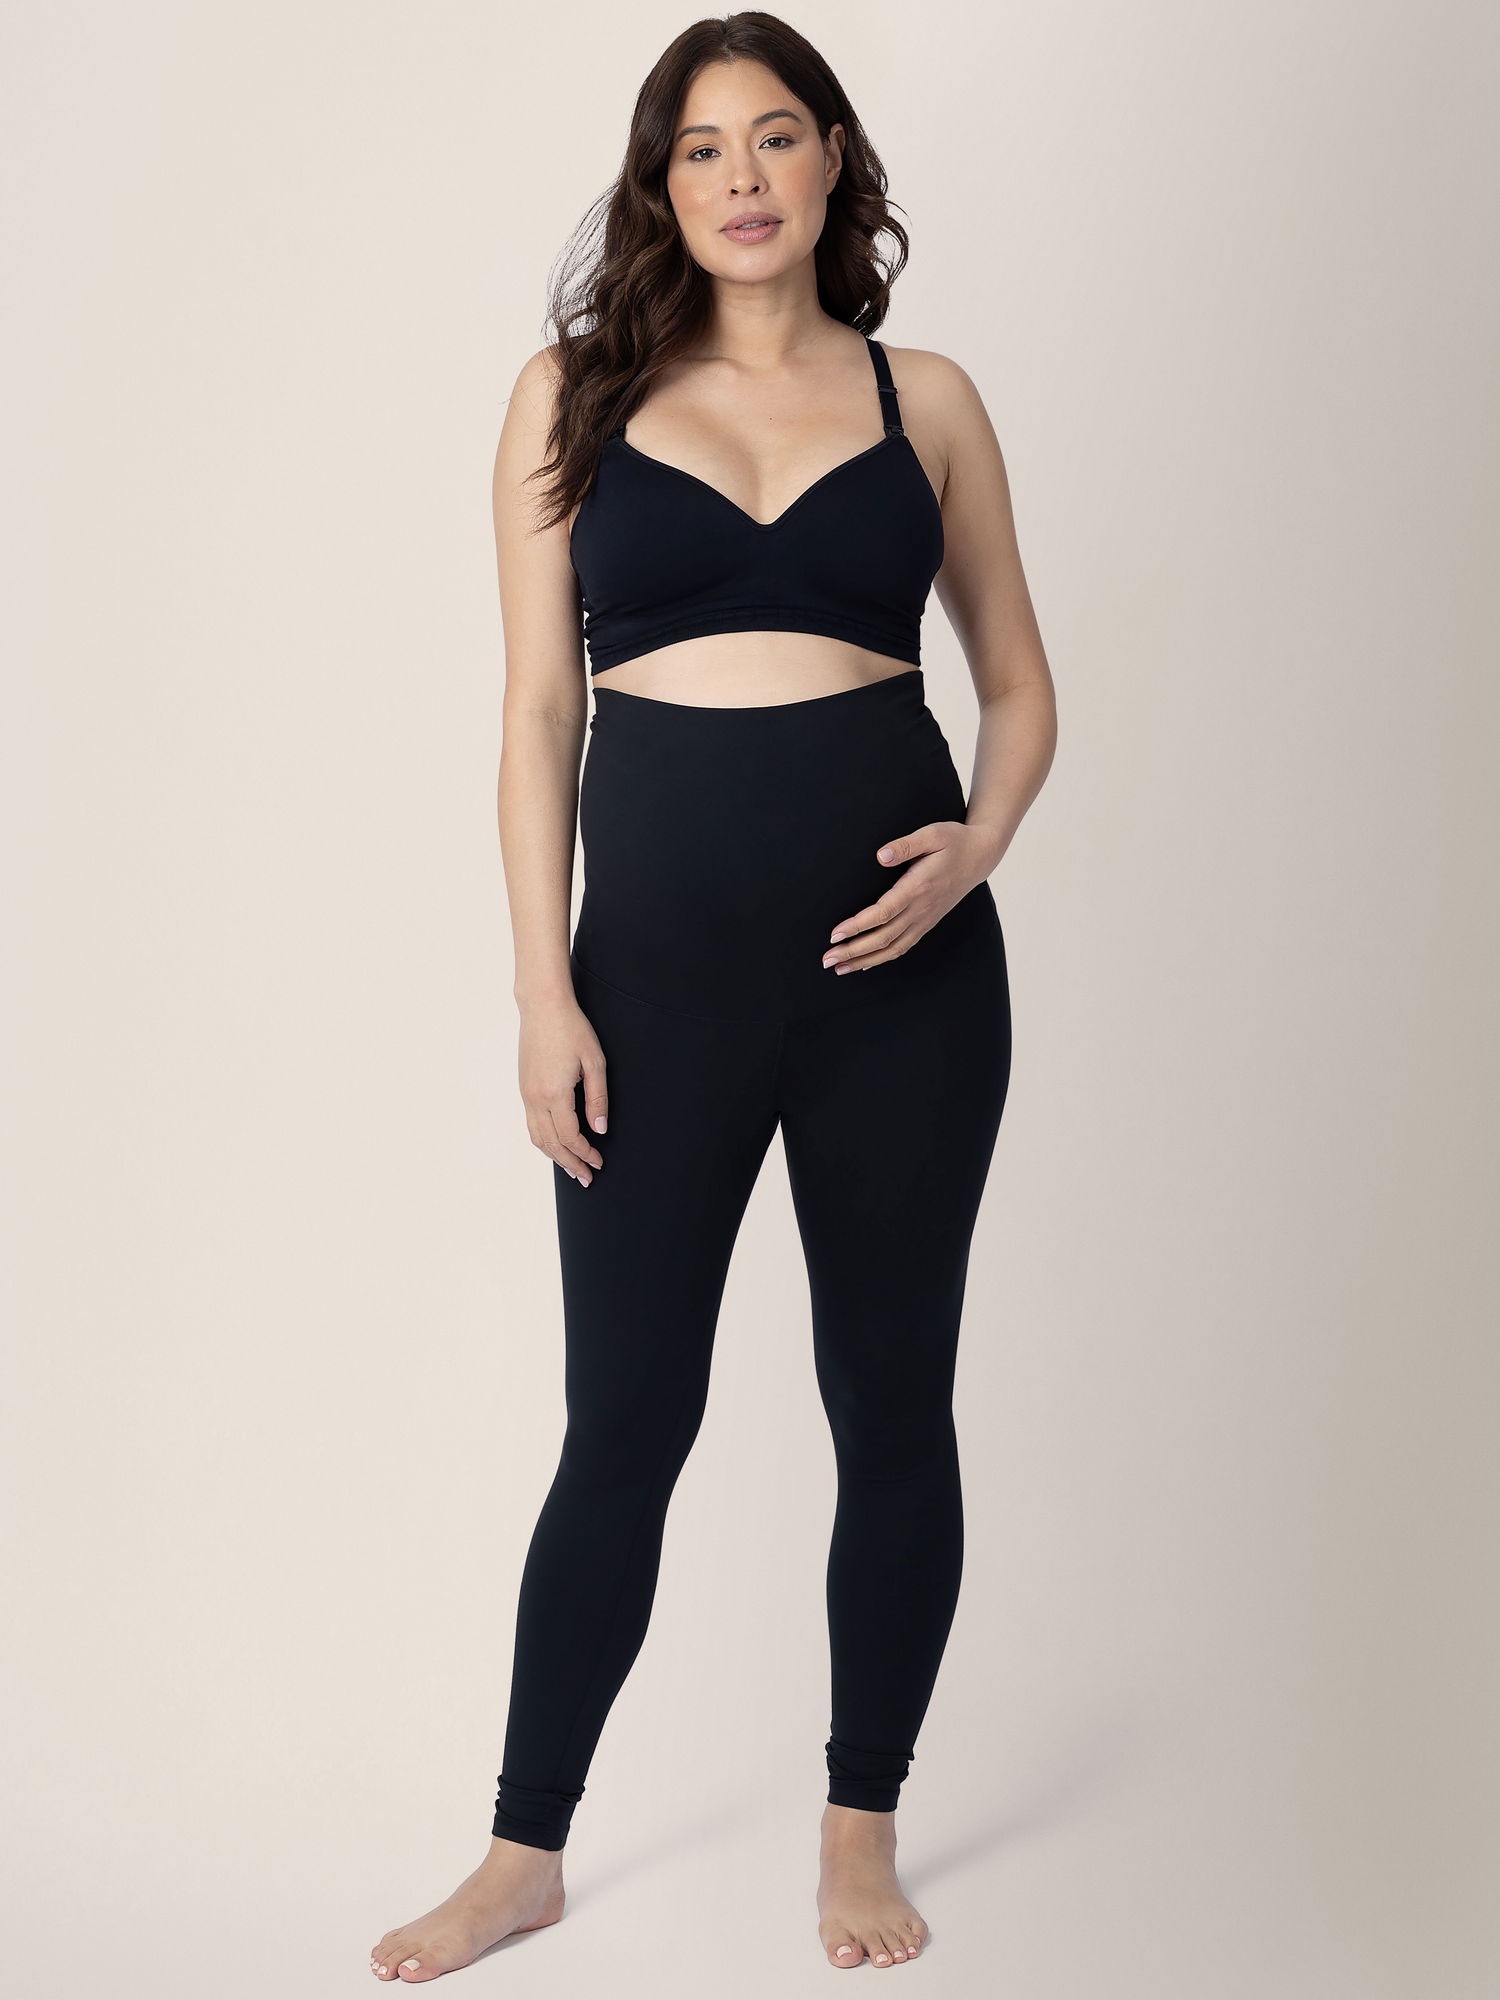 Buy Lovely Mom's Cotton Stretchable Maternity Leggings for Women's Pregnancy, Over  The Belly, Stretchable Maternity Pants for Pre & Post Pregnancy